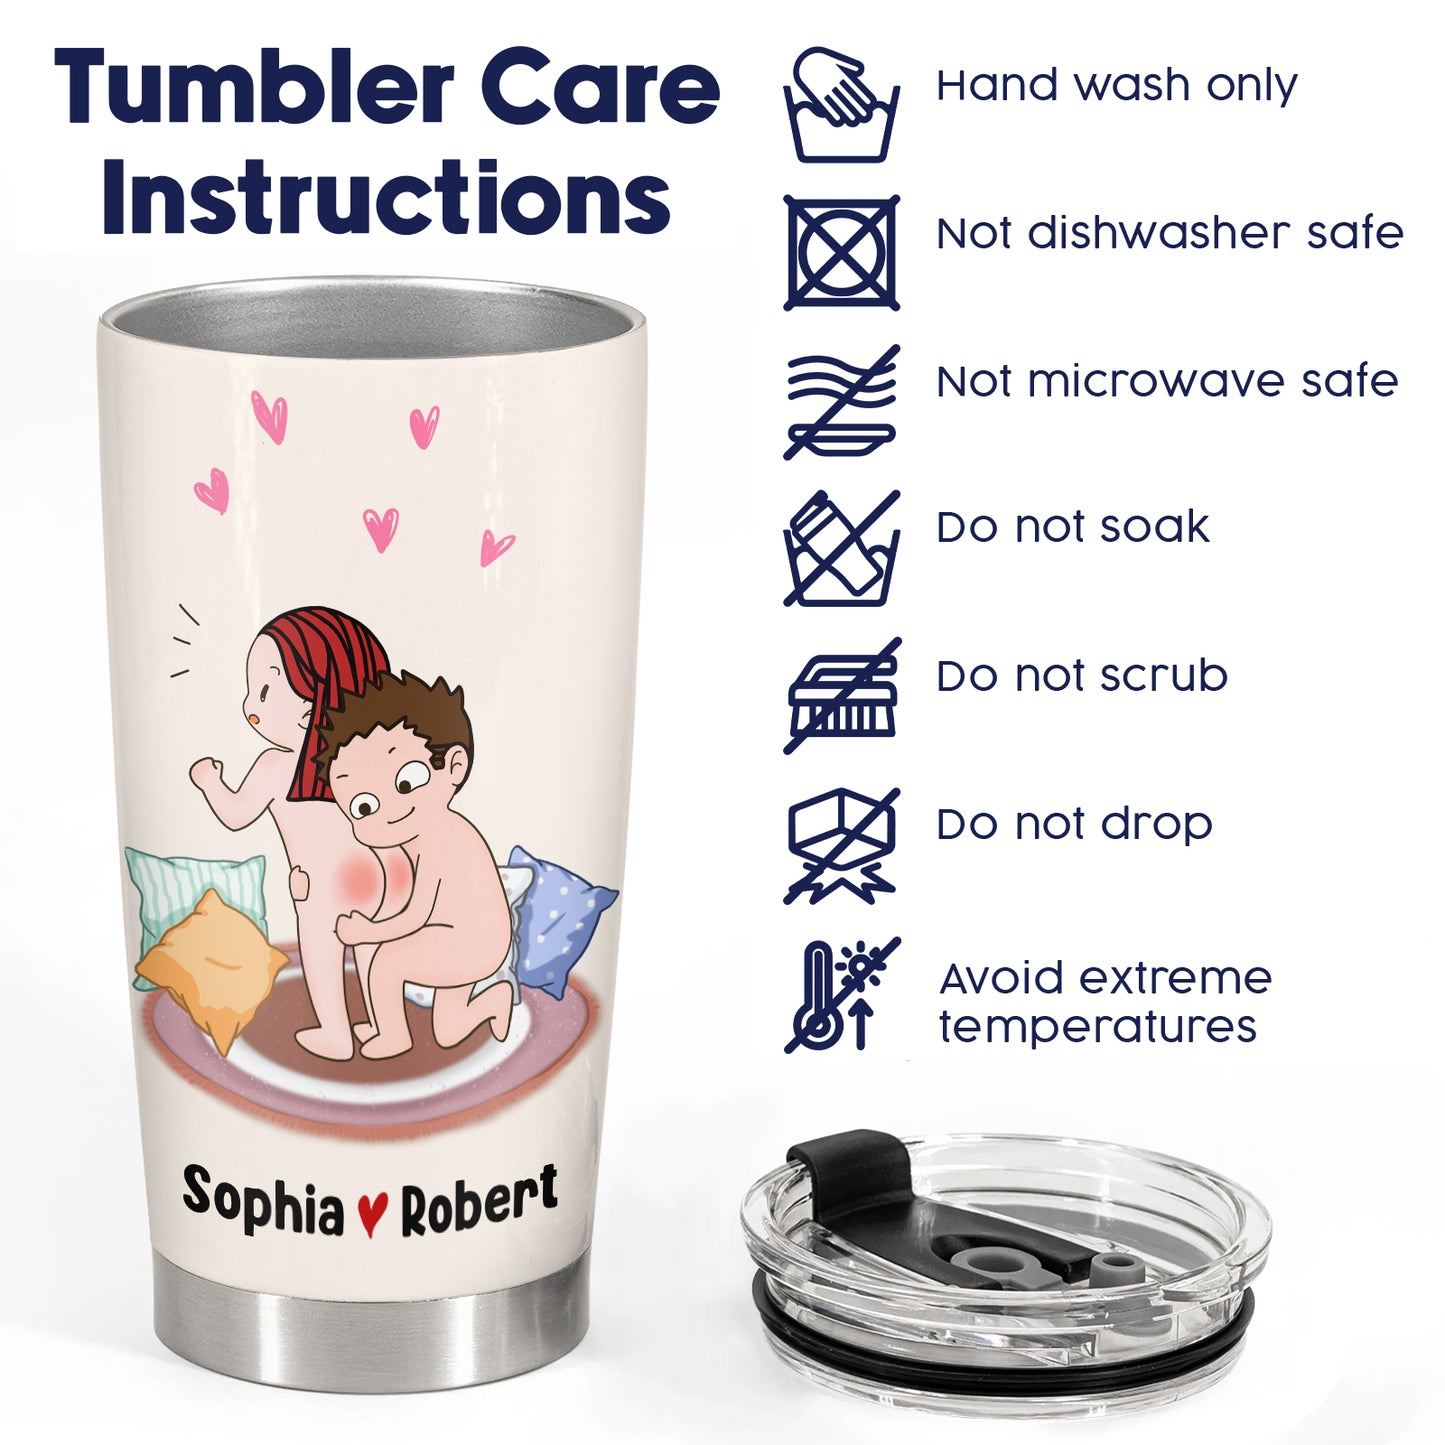 Couple - I Adore You And Love Every Part Of You Especially Your Butt - Personalized Tumbler